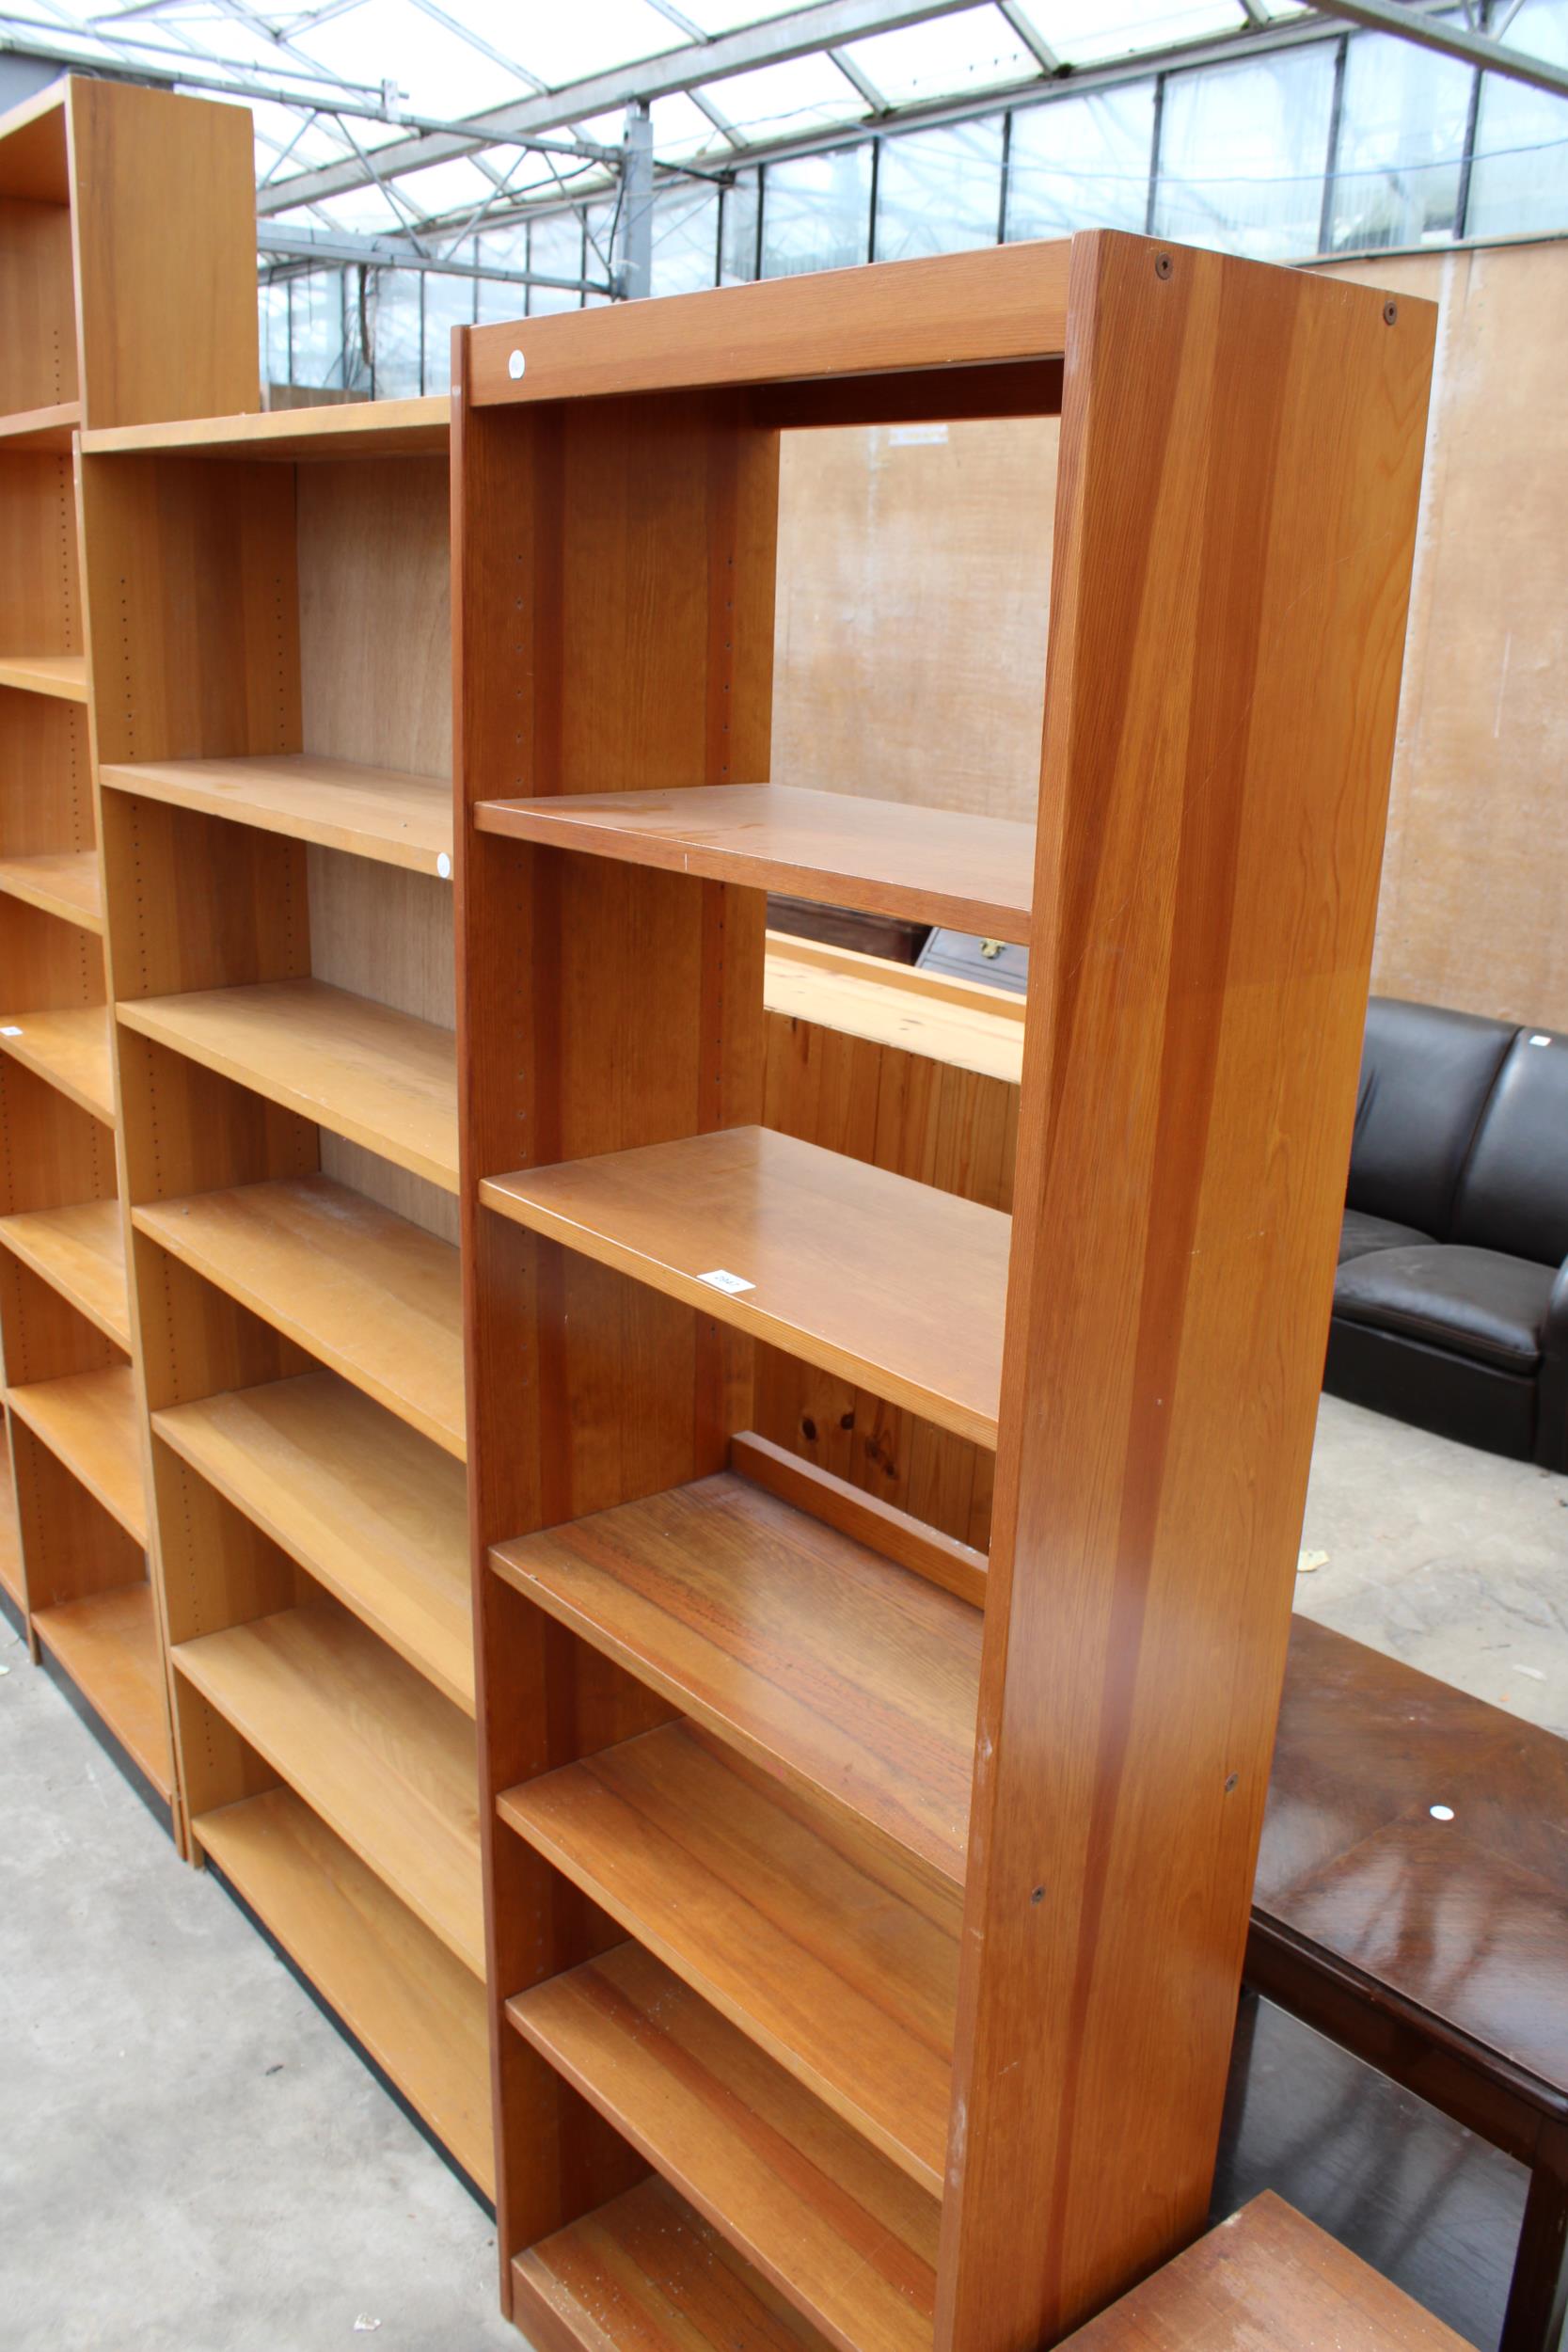 TWO MODERN OPEN SIX TIER BOOKCASES 32" AND 24" WIDE - Image 2 of 2